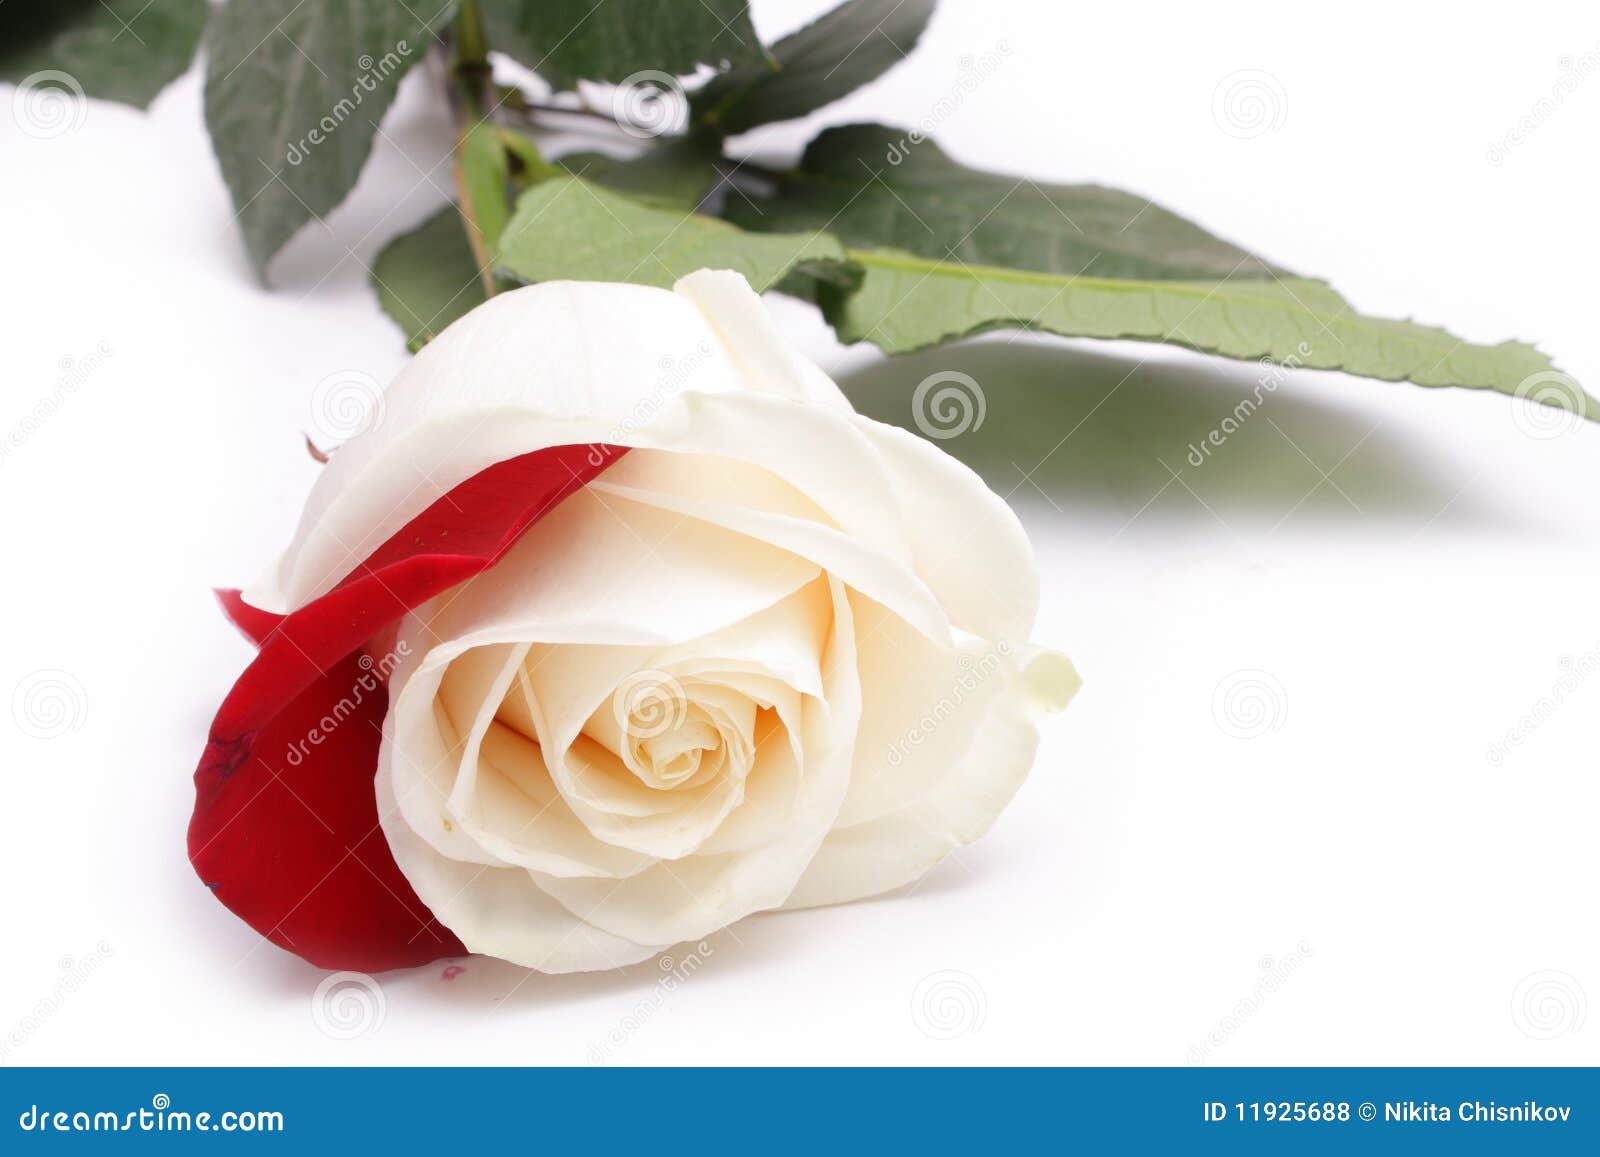 White rose with red petal stock photo. Image of holiday - 11925688